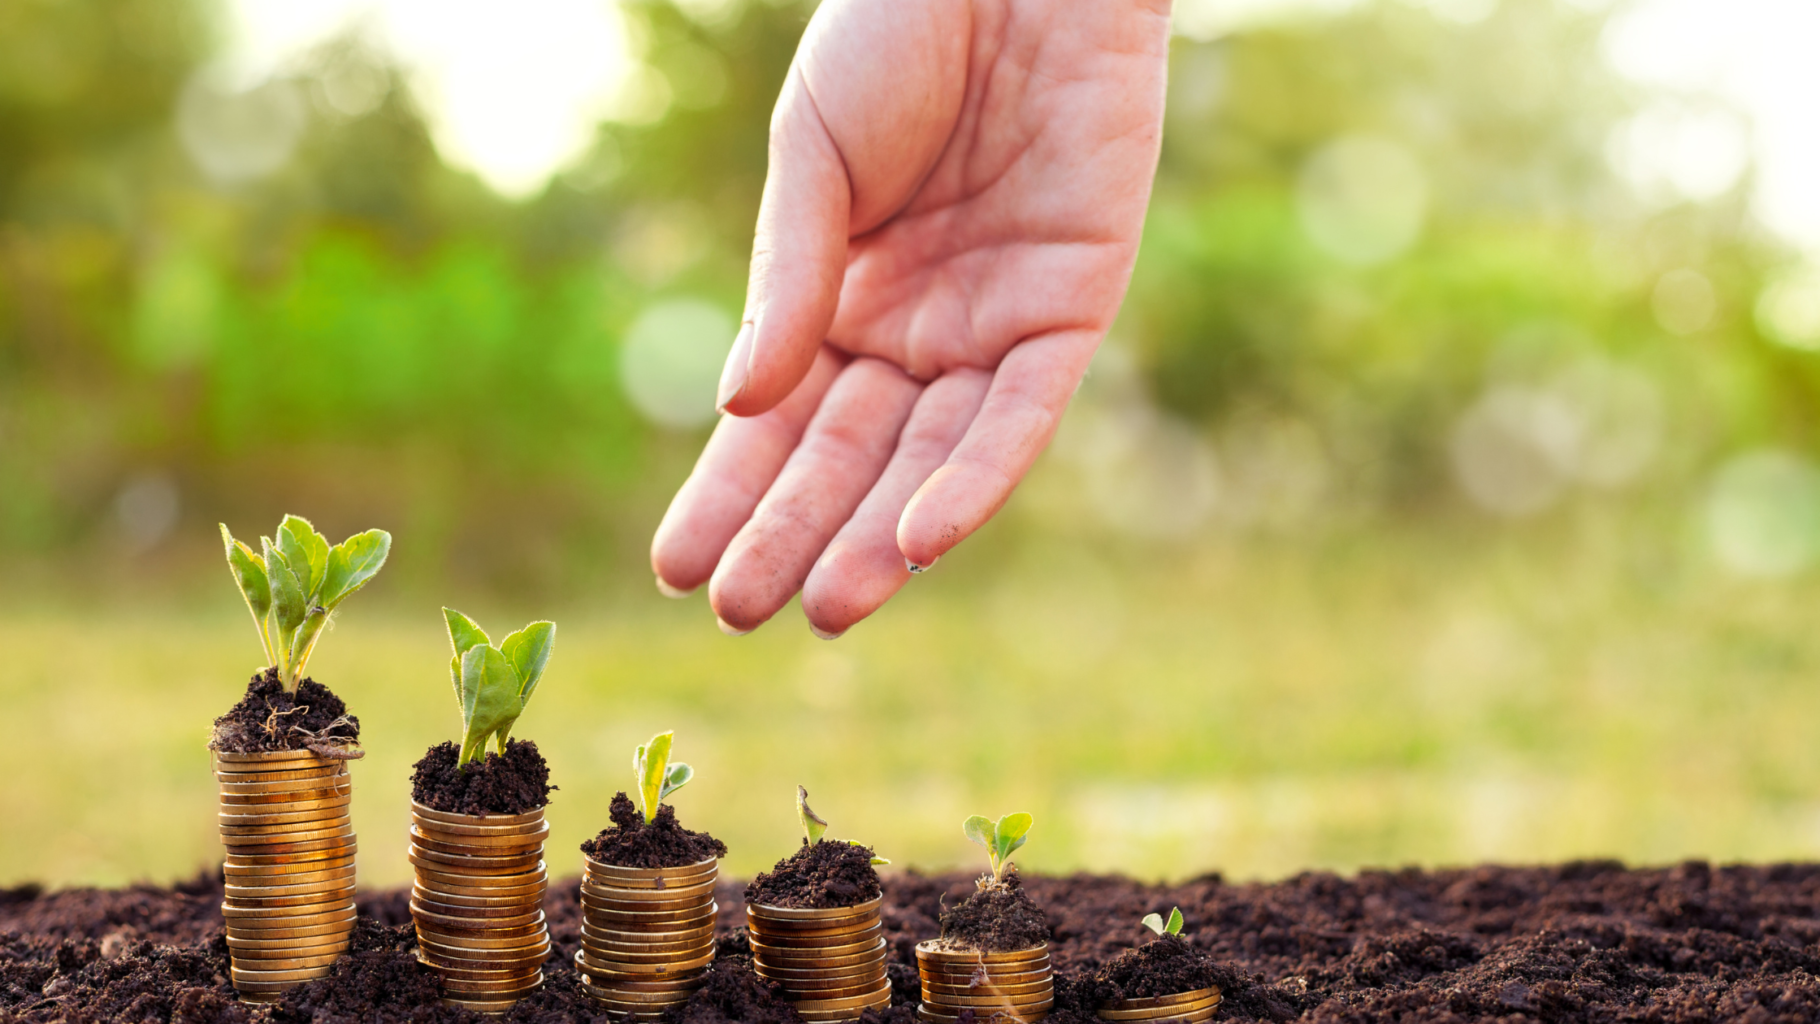 Growing Your Financial Garden - The Art of Nurturing Your Investments